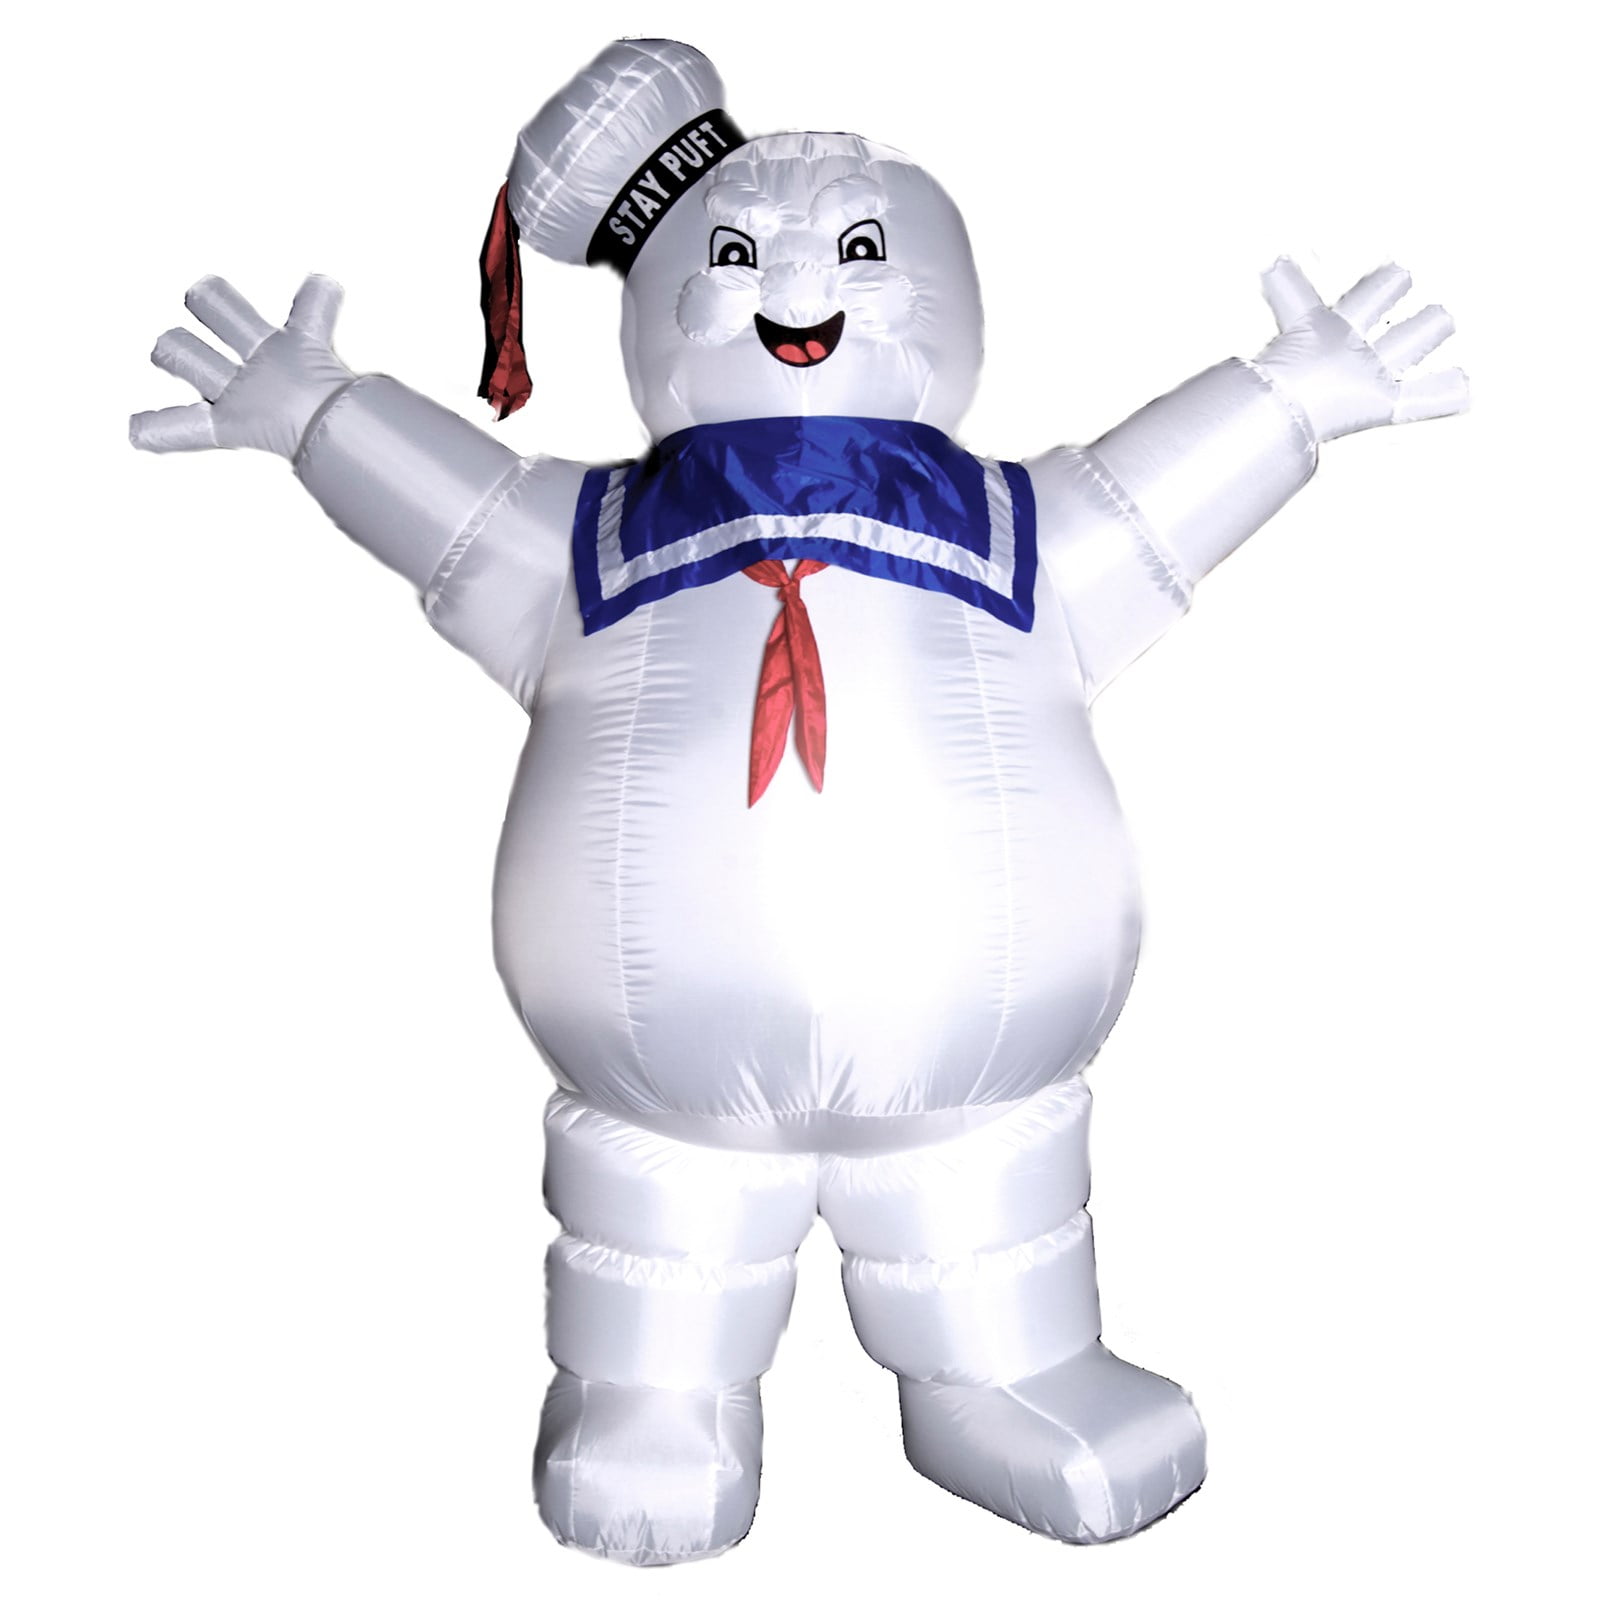 Stay Puft Marshmallow Man Inflatable Ghostbusters Halloween Adult Costume 